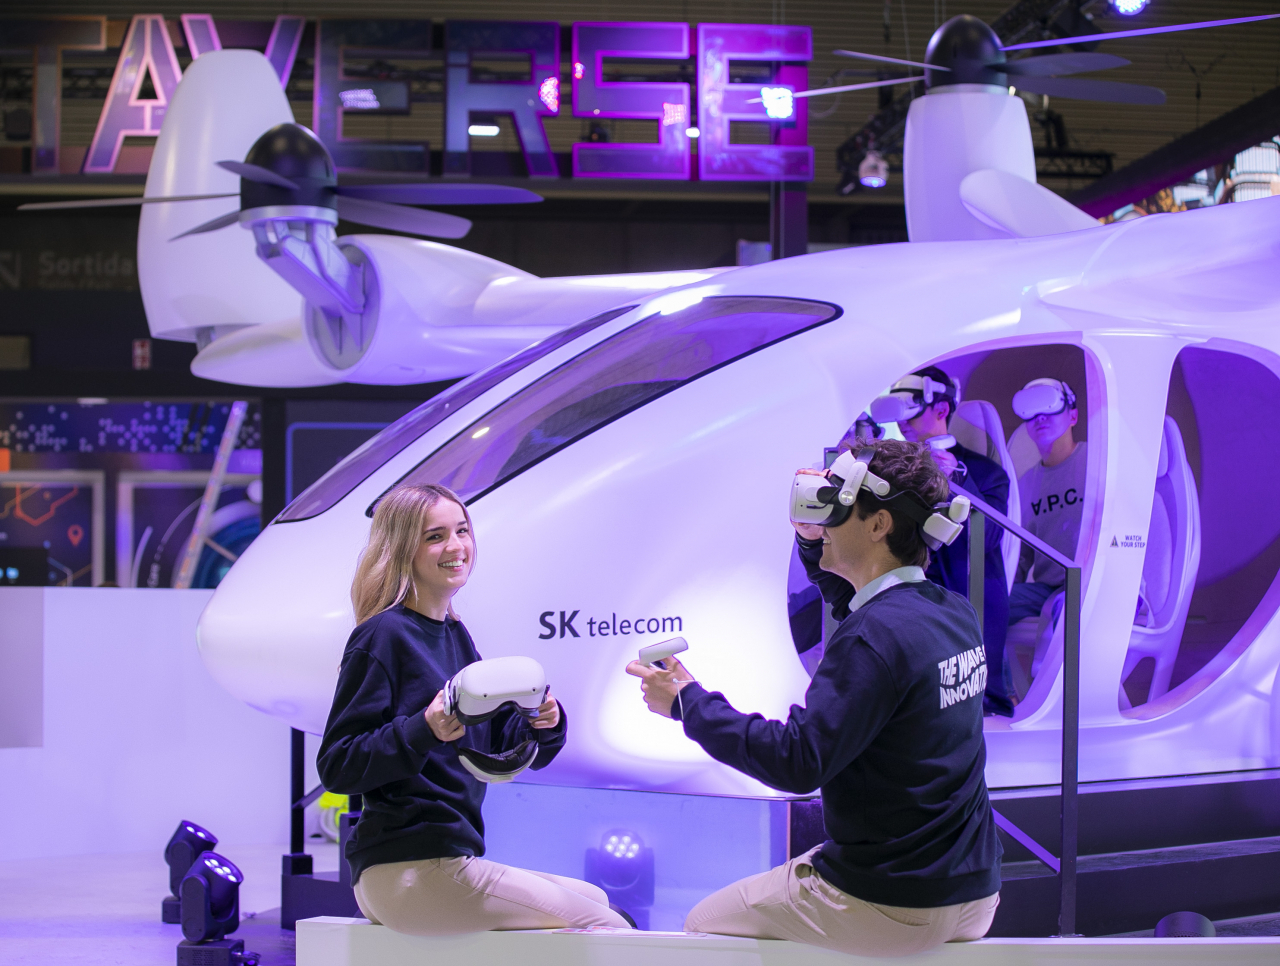 Virtual reality devices are displayed at an SK Telecom showroom set up at this year's Mobile World Congress in Barcelona, Spain. (SK Telecom)